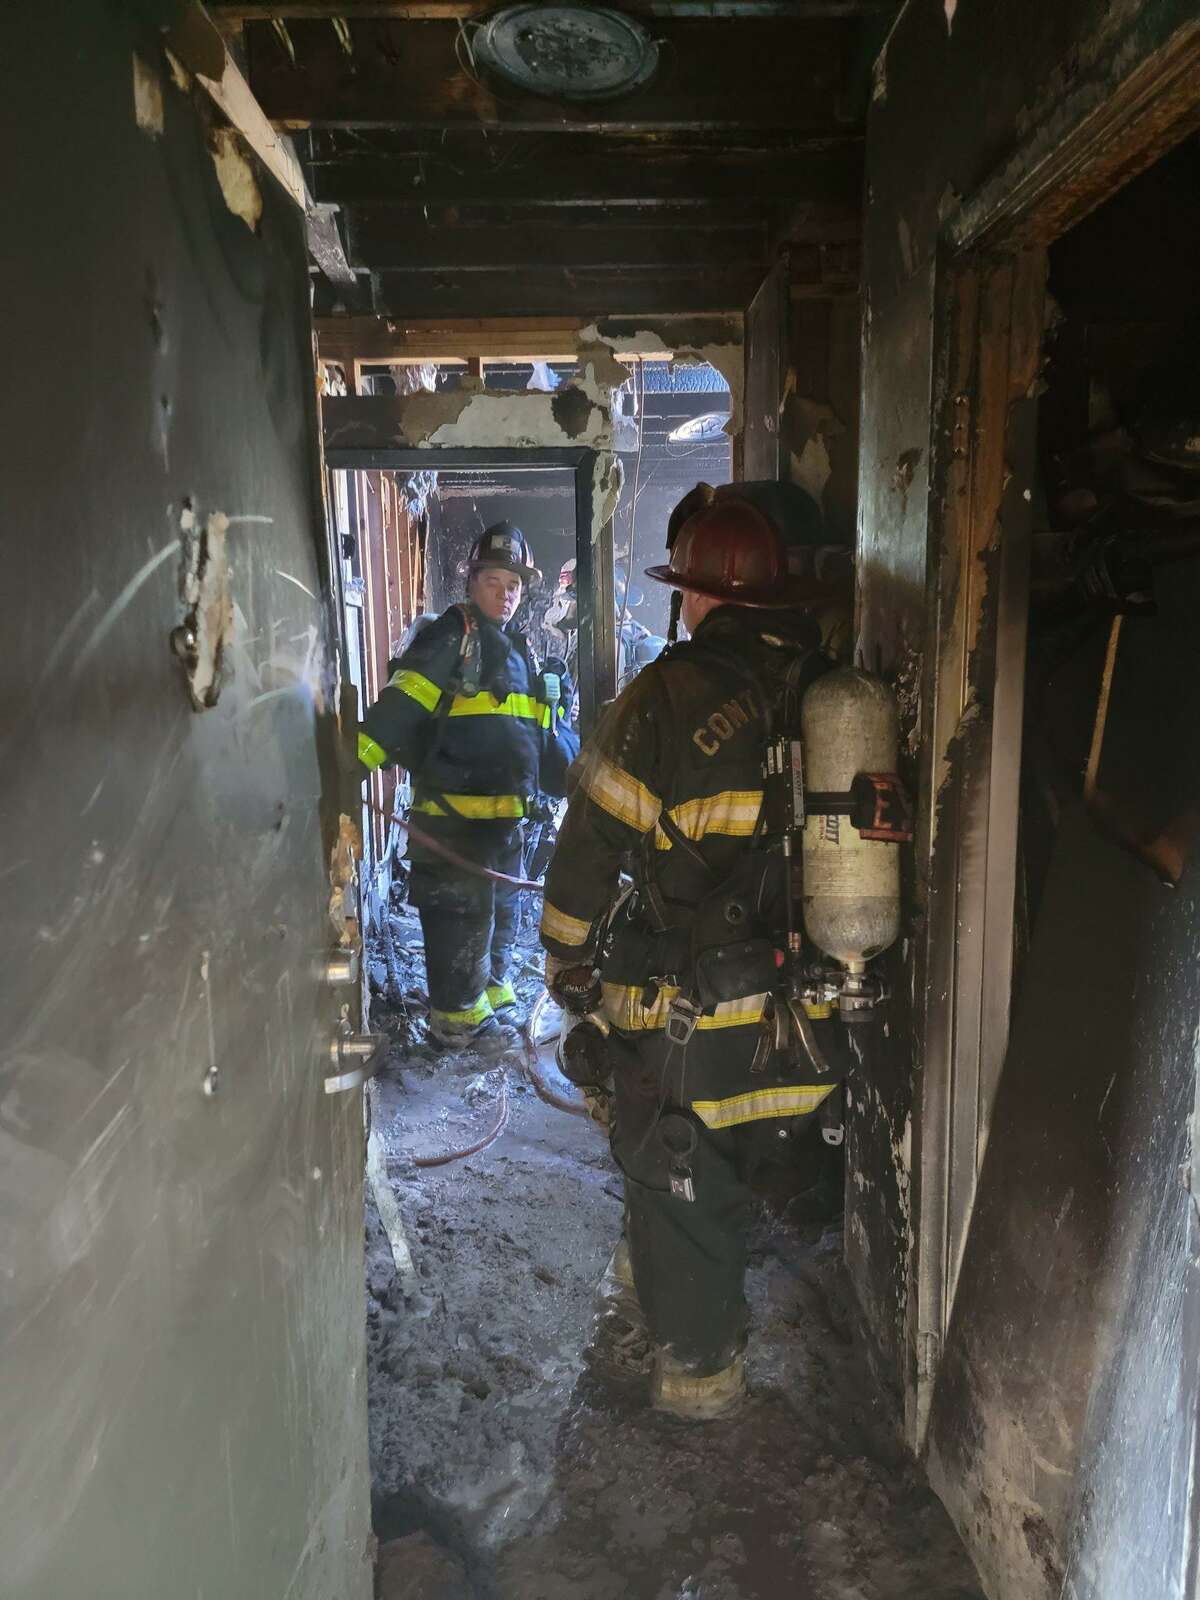 Firefighters rescued an injured resident of a senior housing complex in Pleasant Hill on Thursday after a fire started in one of the second-floor units, officials said.